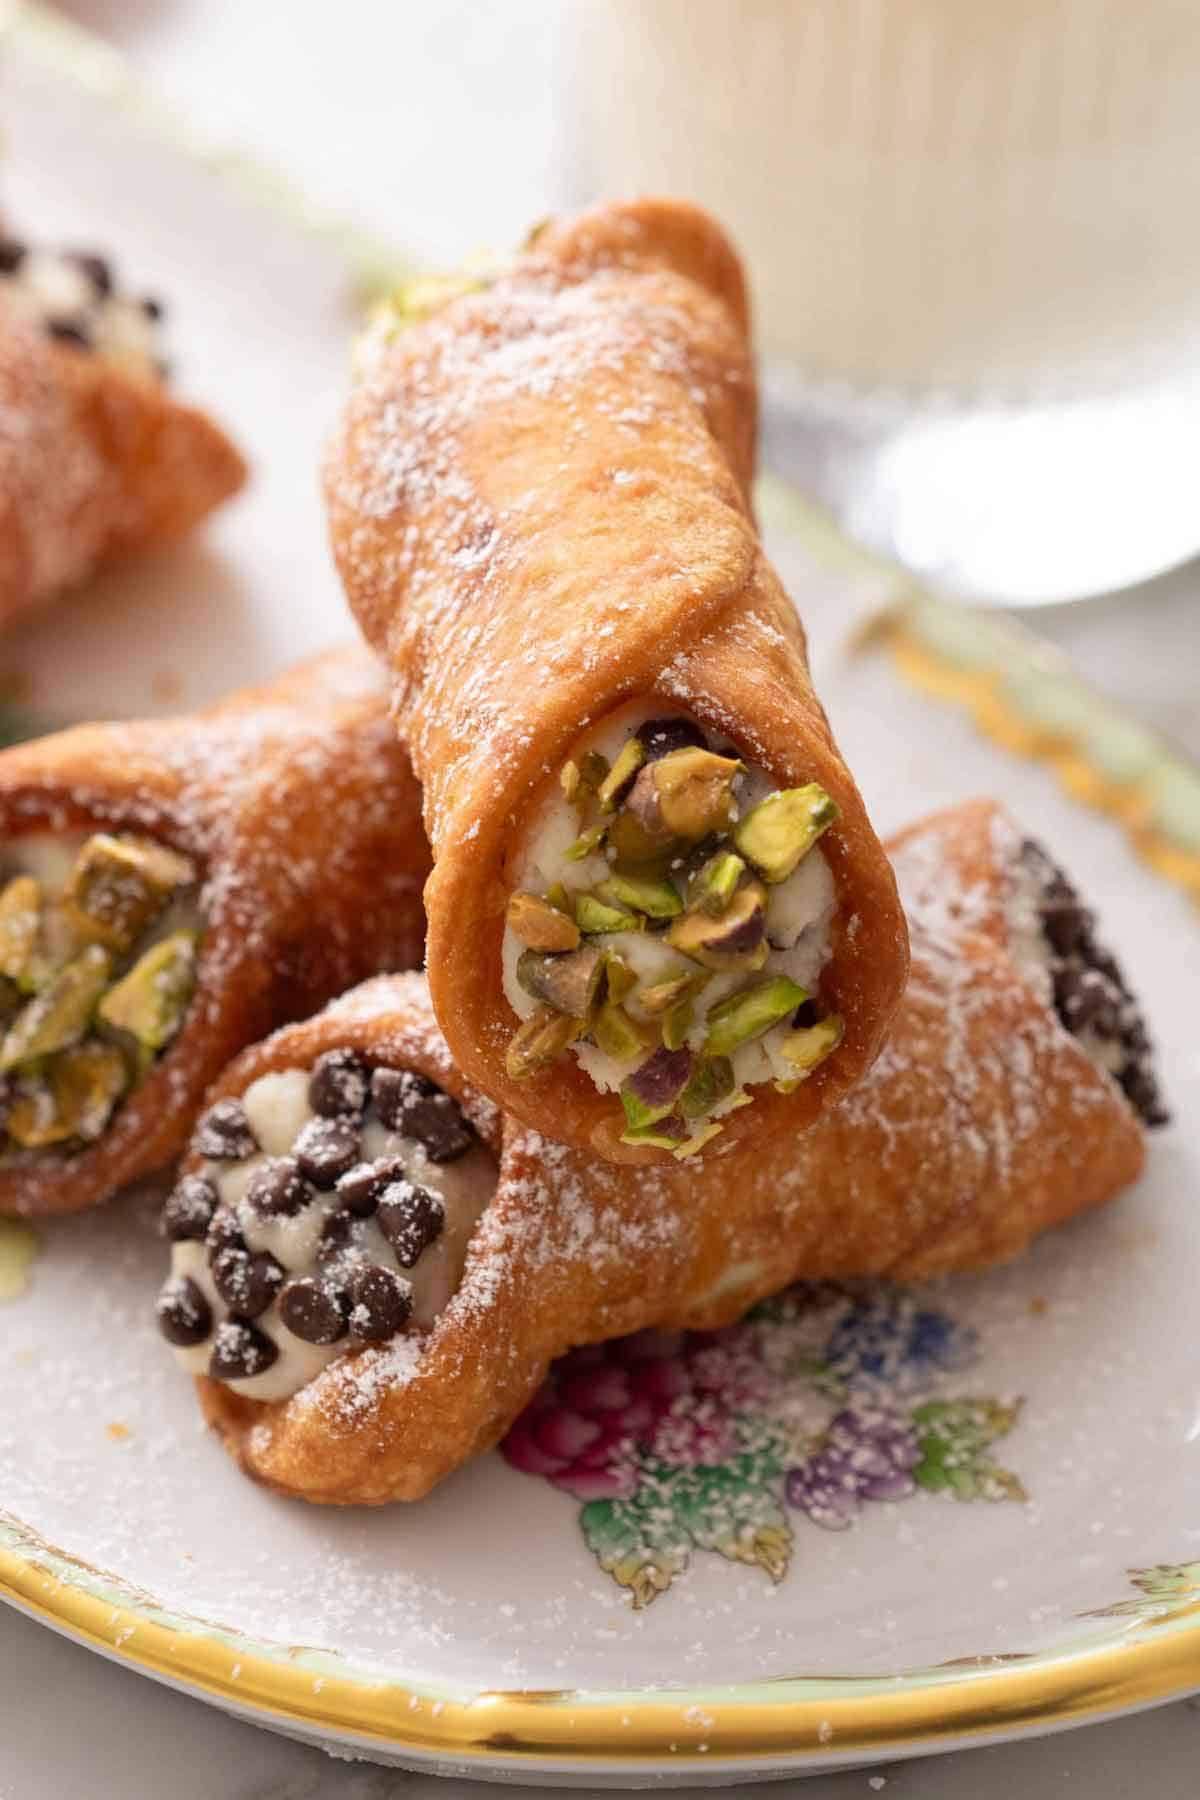 A stack of cannoli with crushed pistachos in two and chocolate chips in another.